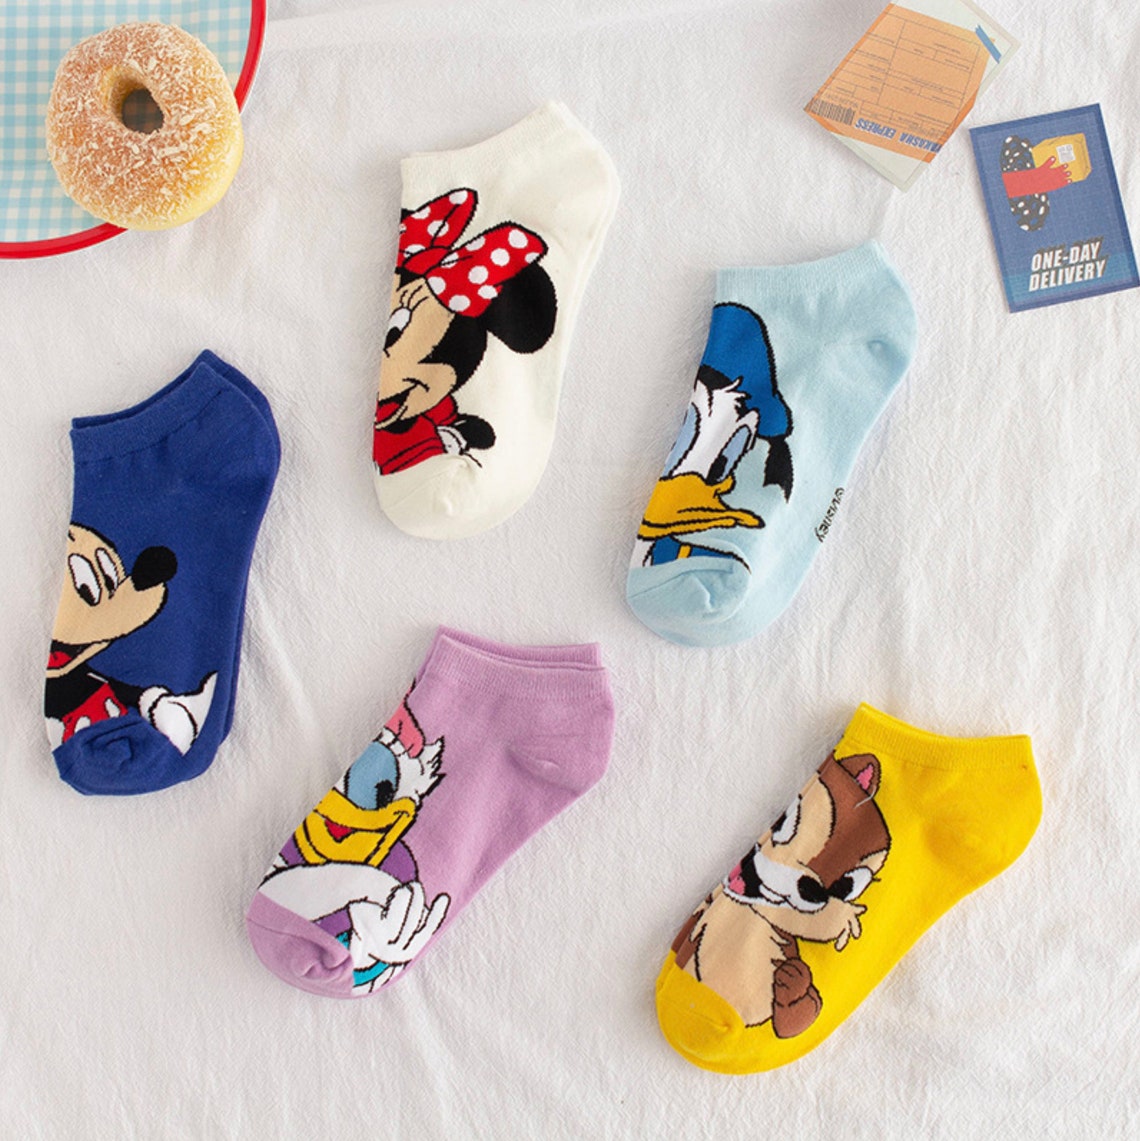 5 Pairs Disney Character Novelty Socks light weight ankle | Etsy